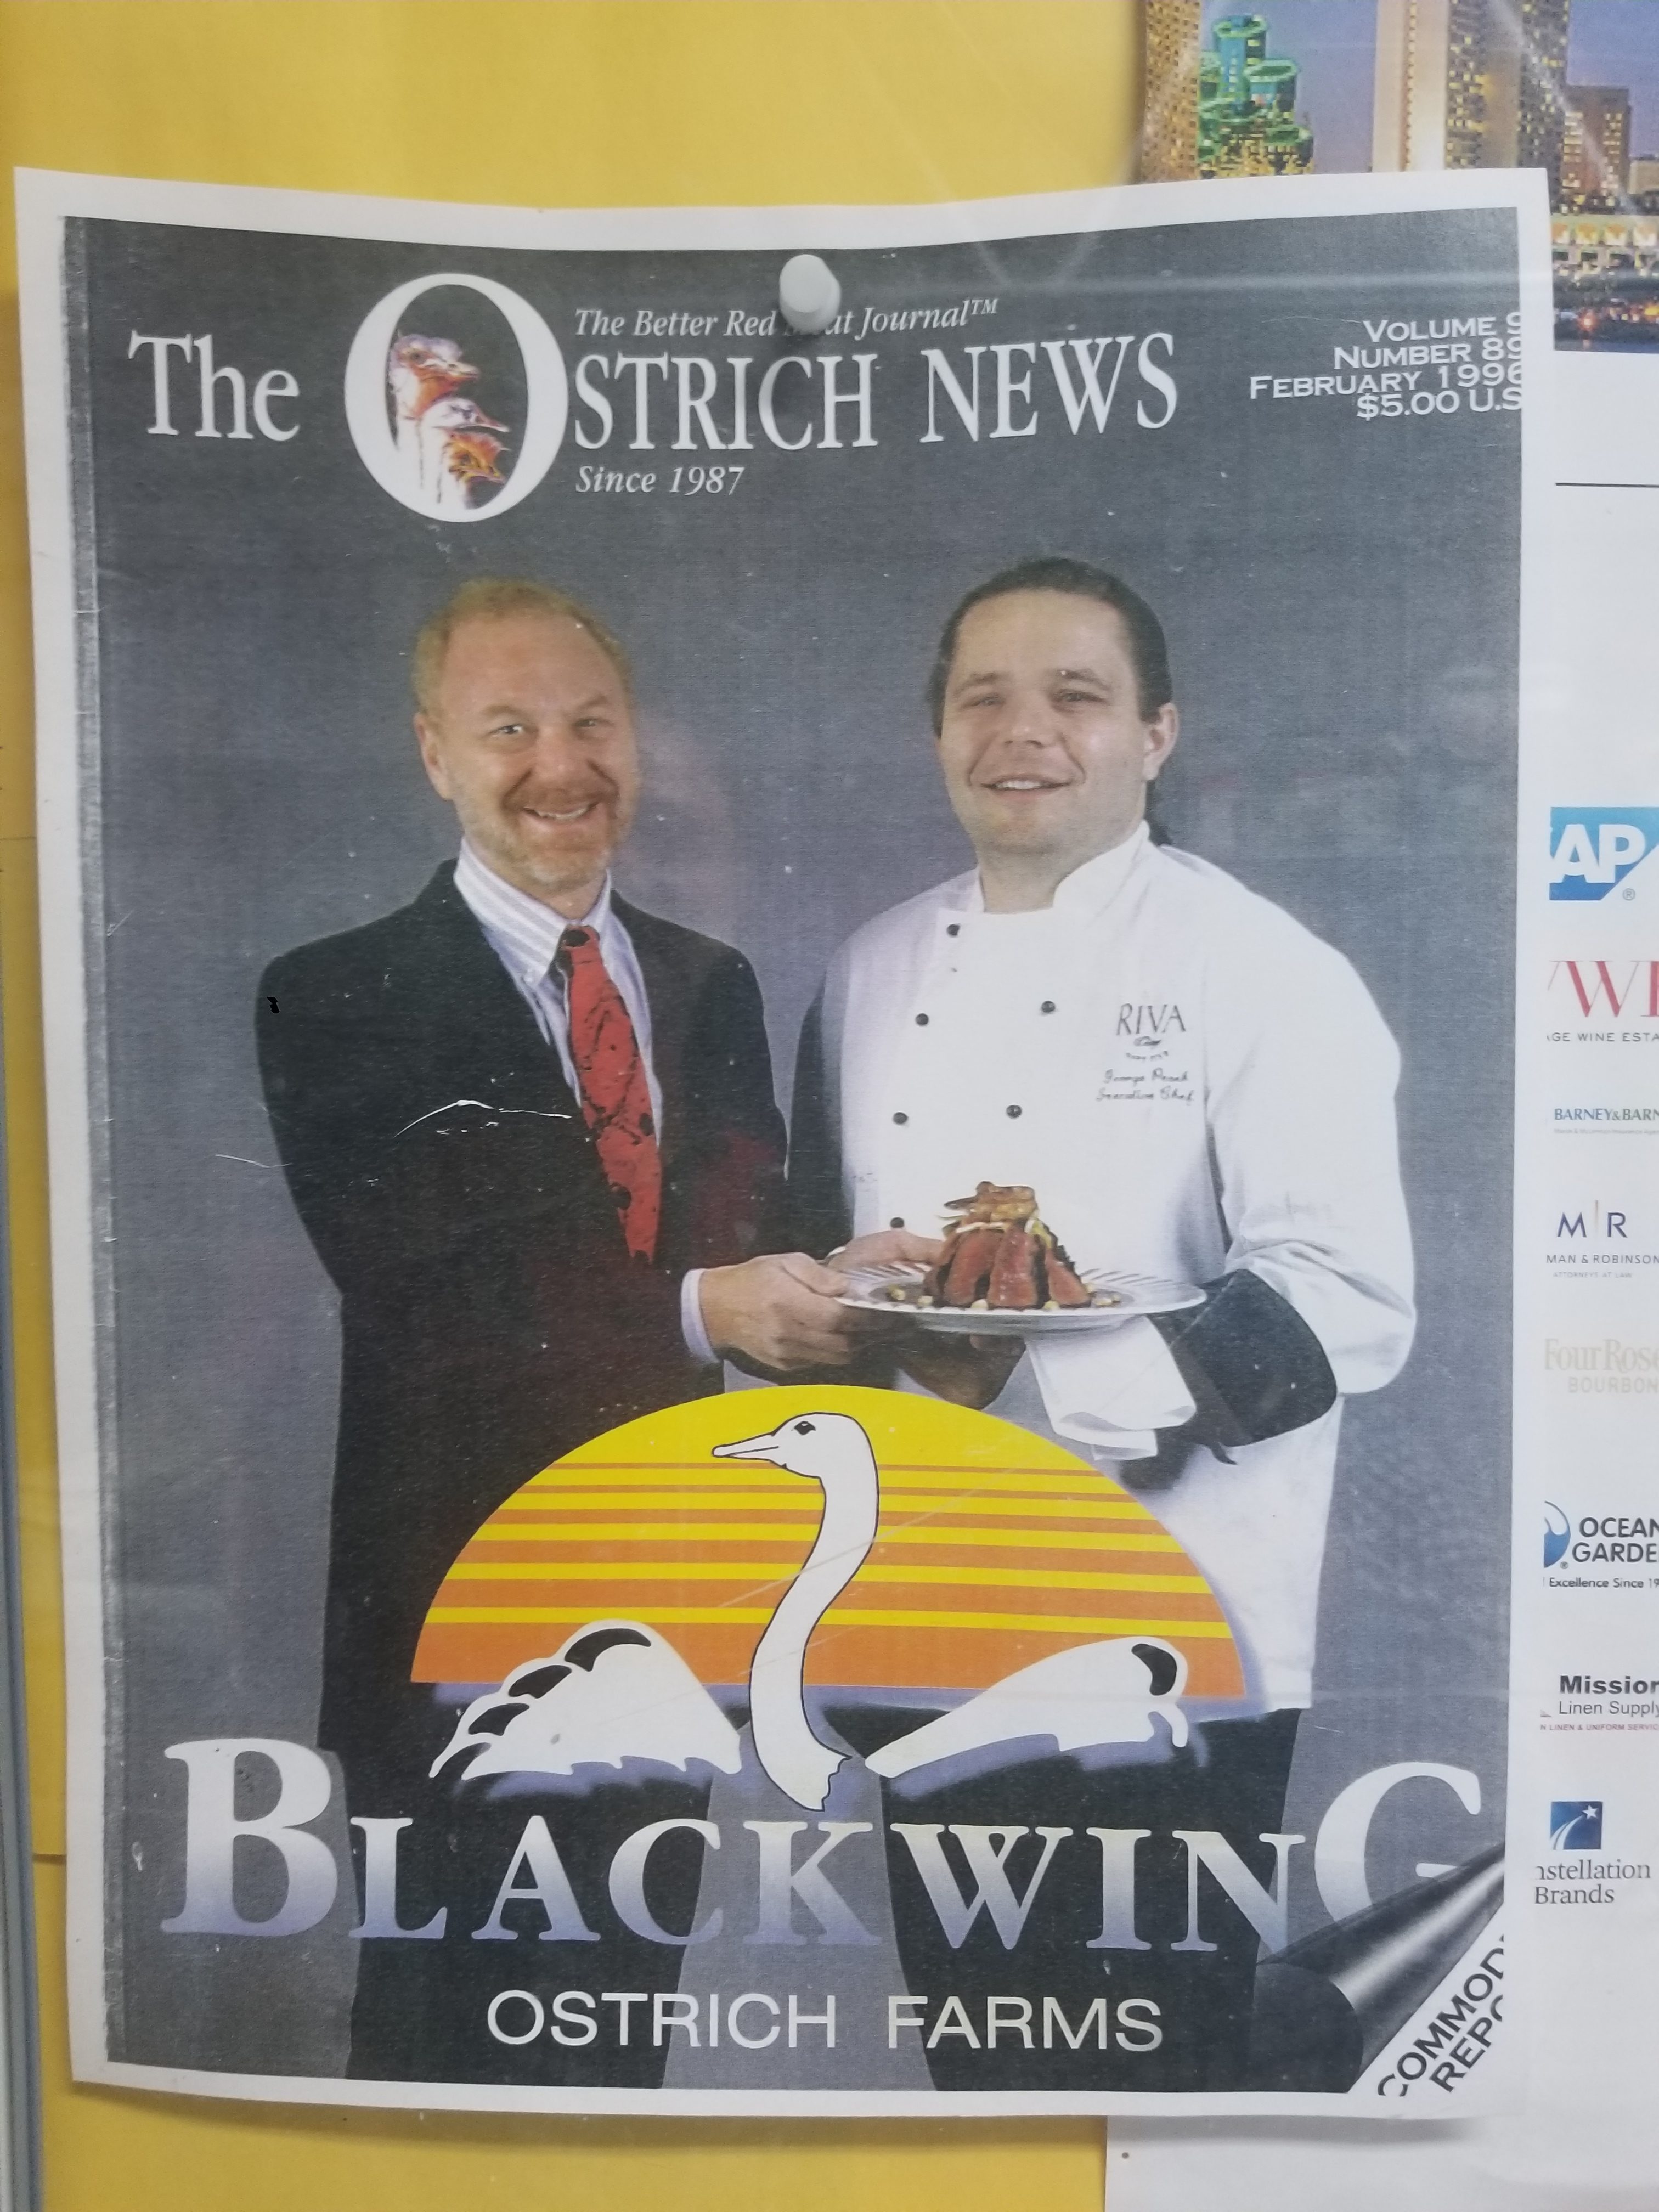 Roger Gerber poses with an executive chef in the Ostrich News publication